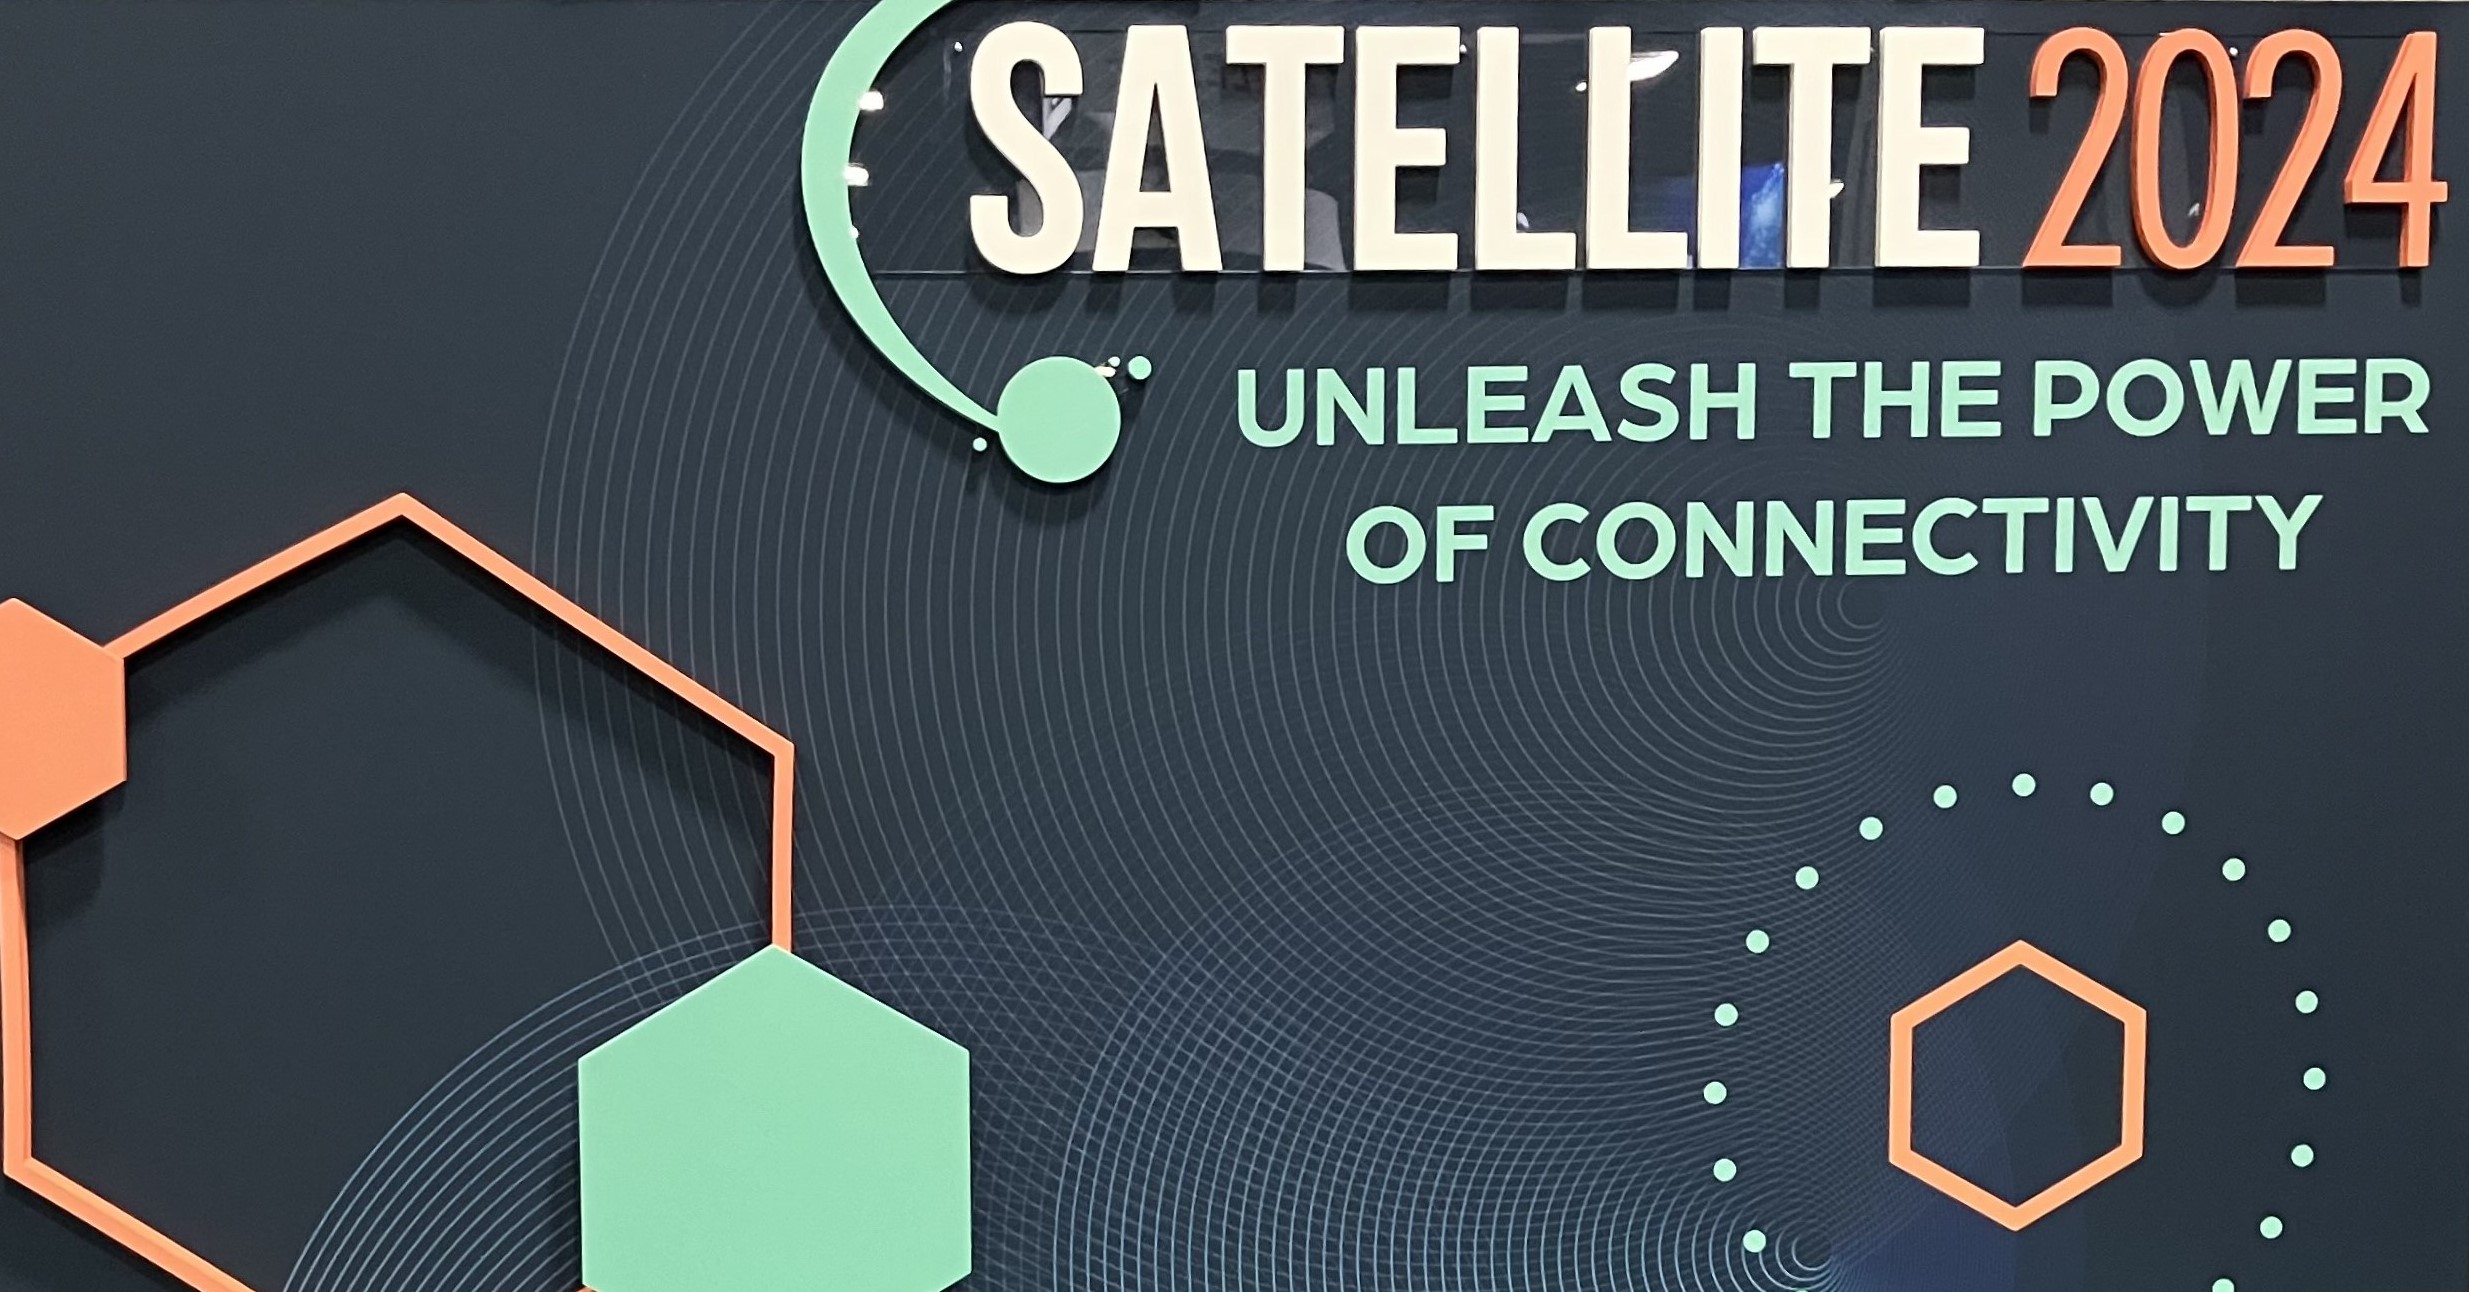 Comsat Architects’ Debut at the 2024 Satellite Conference